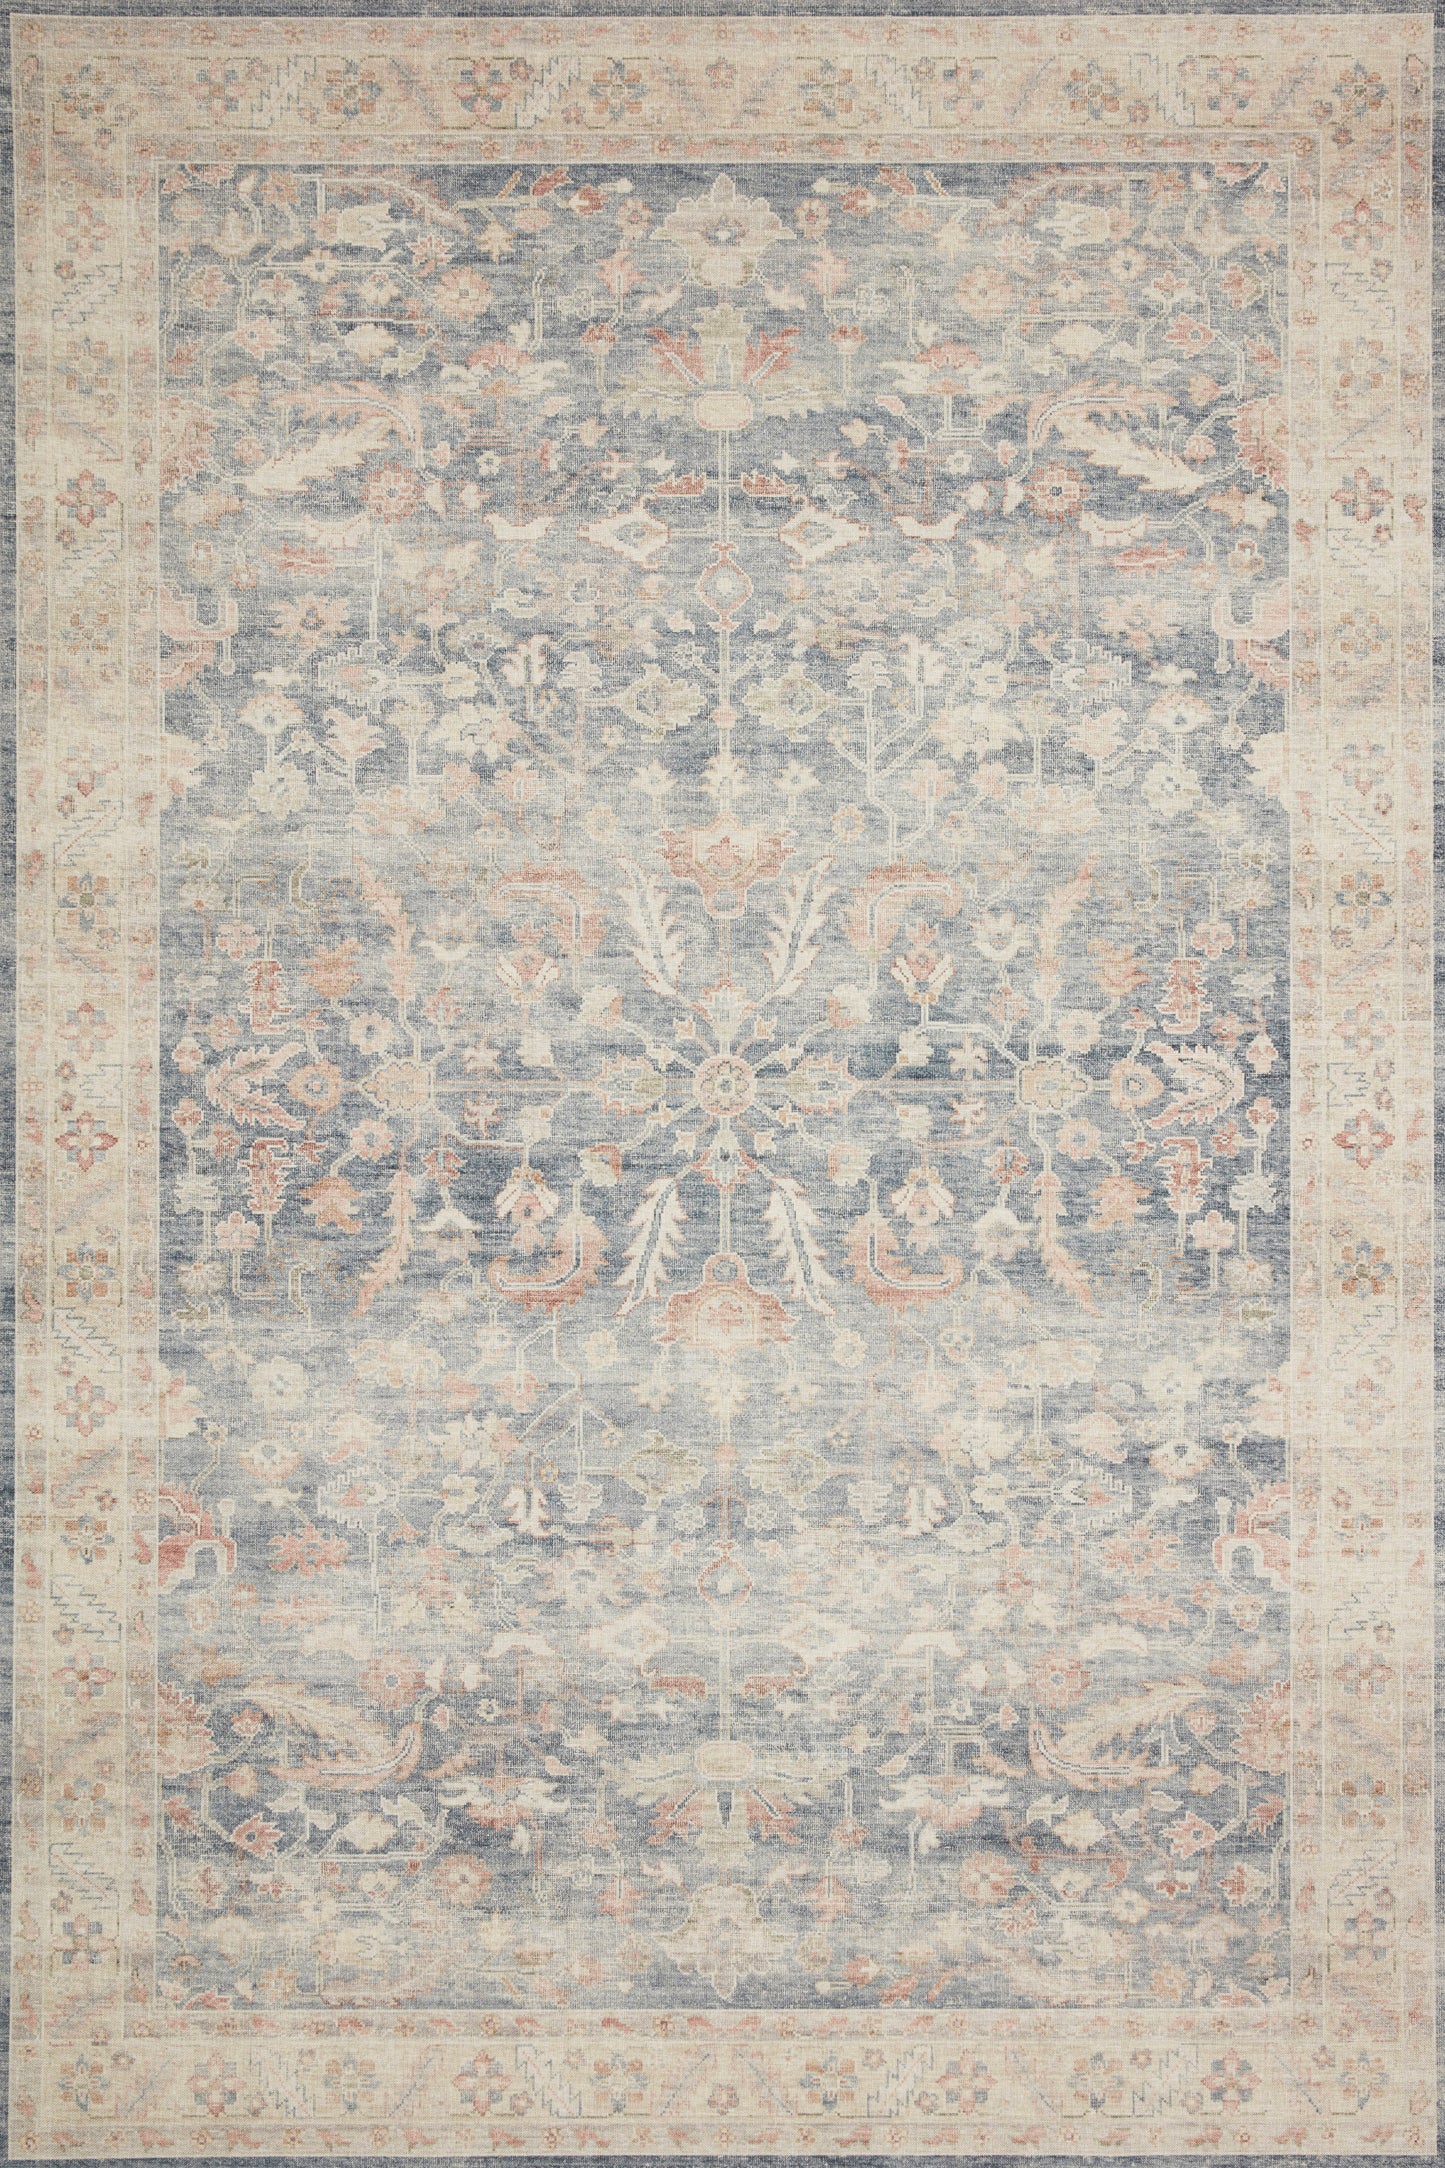 A picture of Loloi's Hathaway rug, in style HTH-02, color Denim / Multi